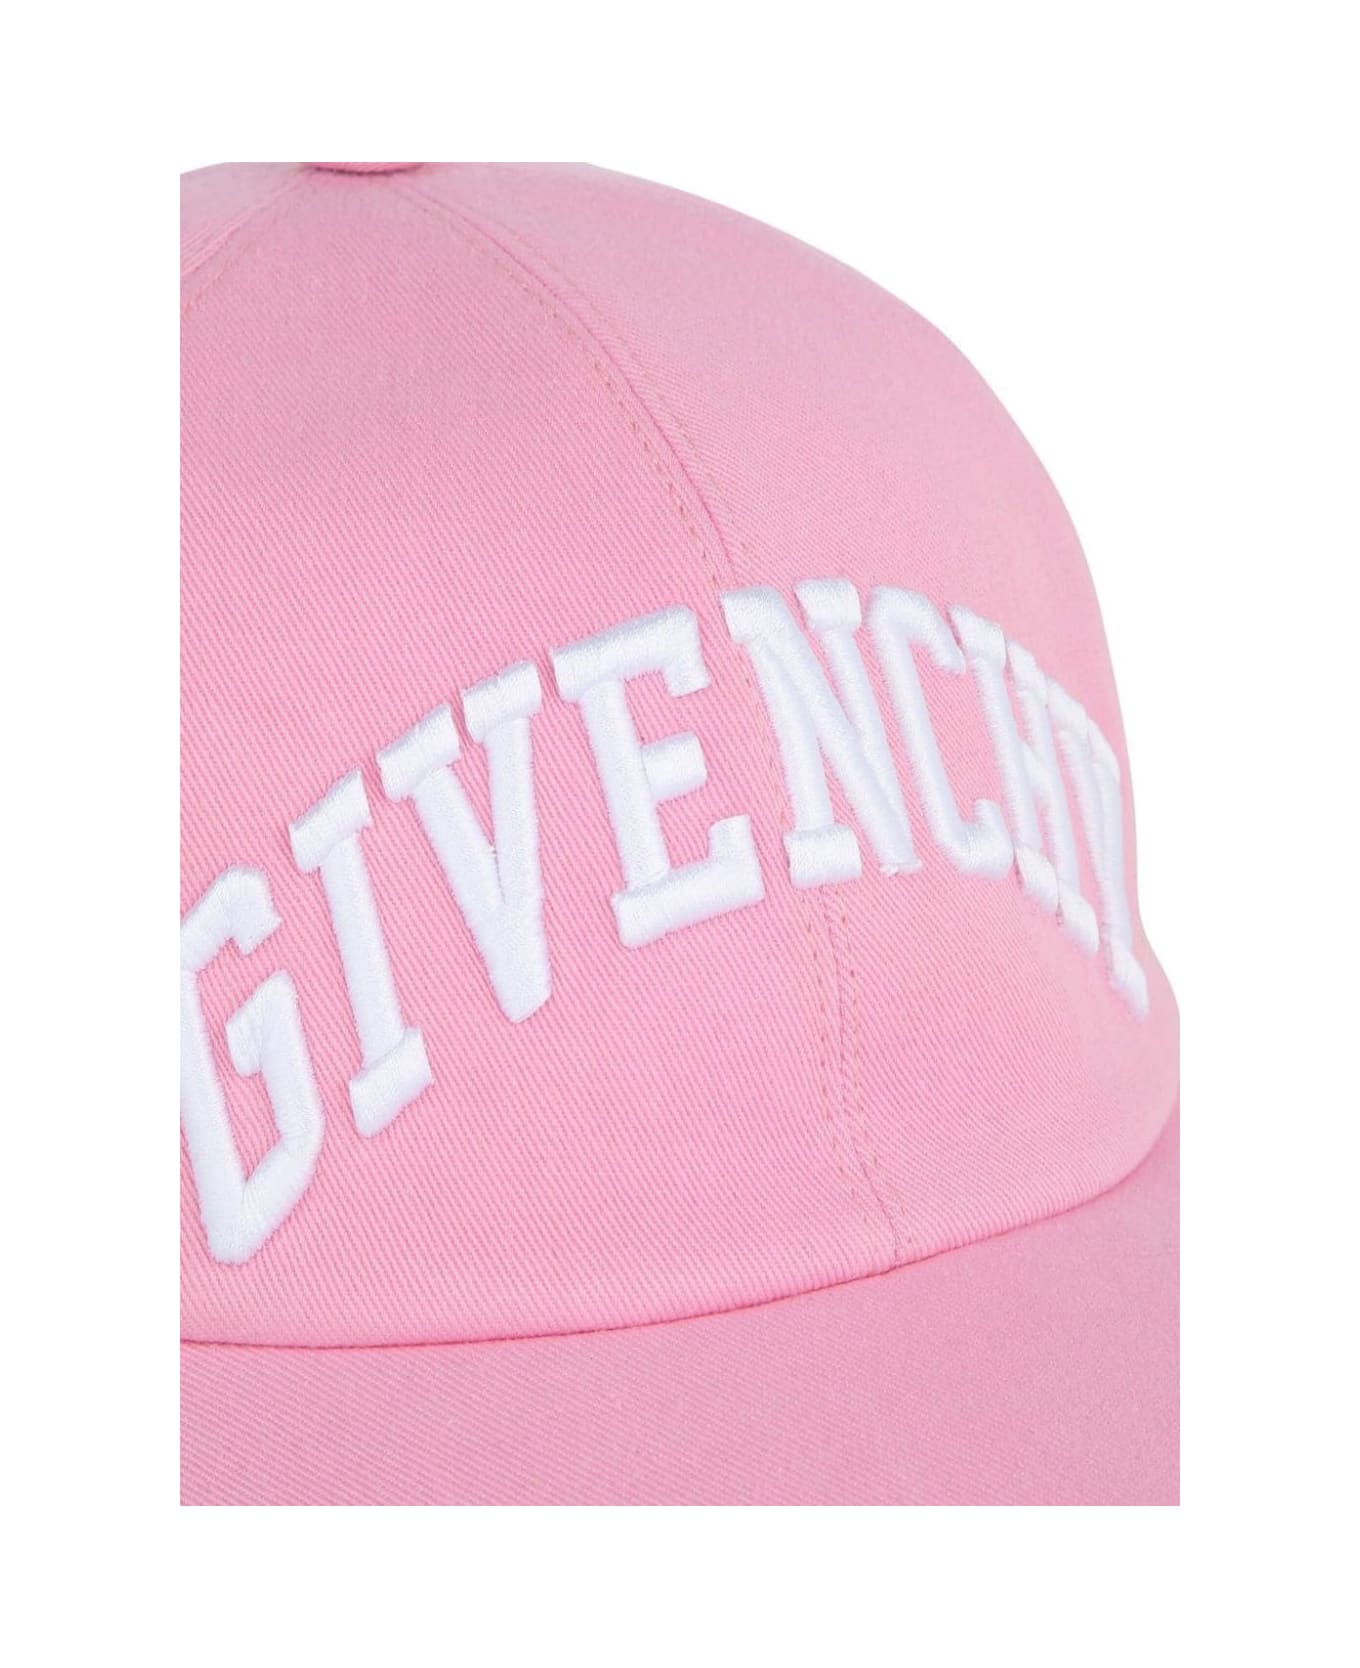 Givenchy Logo Embossed Cap - Pink